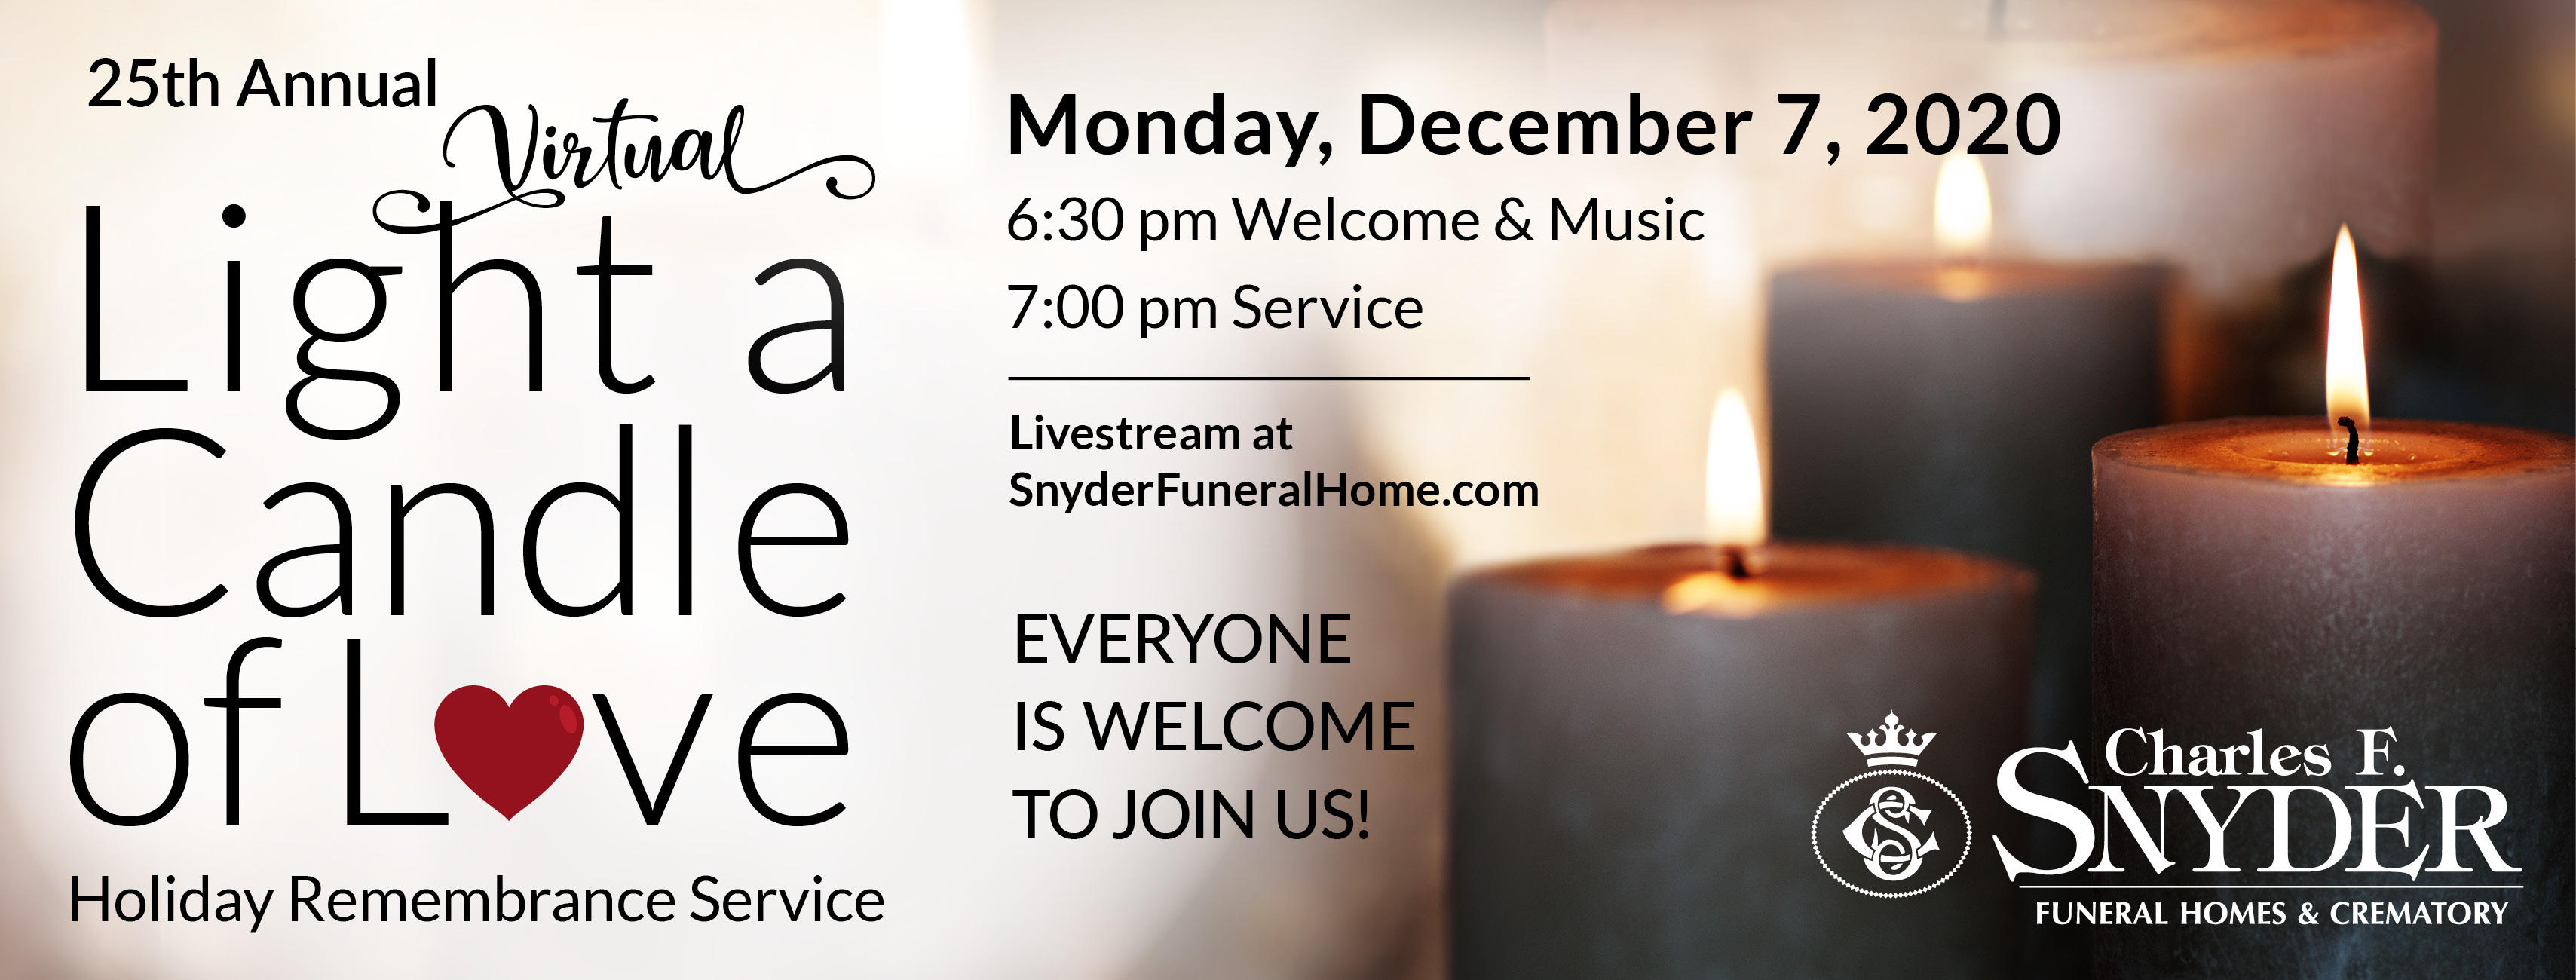 Spacht-Snyder Family Funeral Home & Crematory